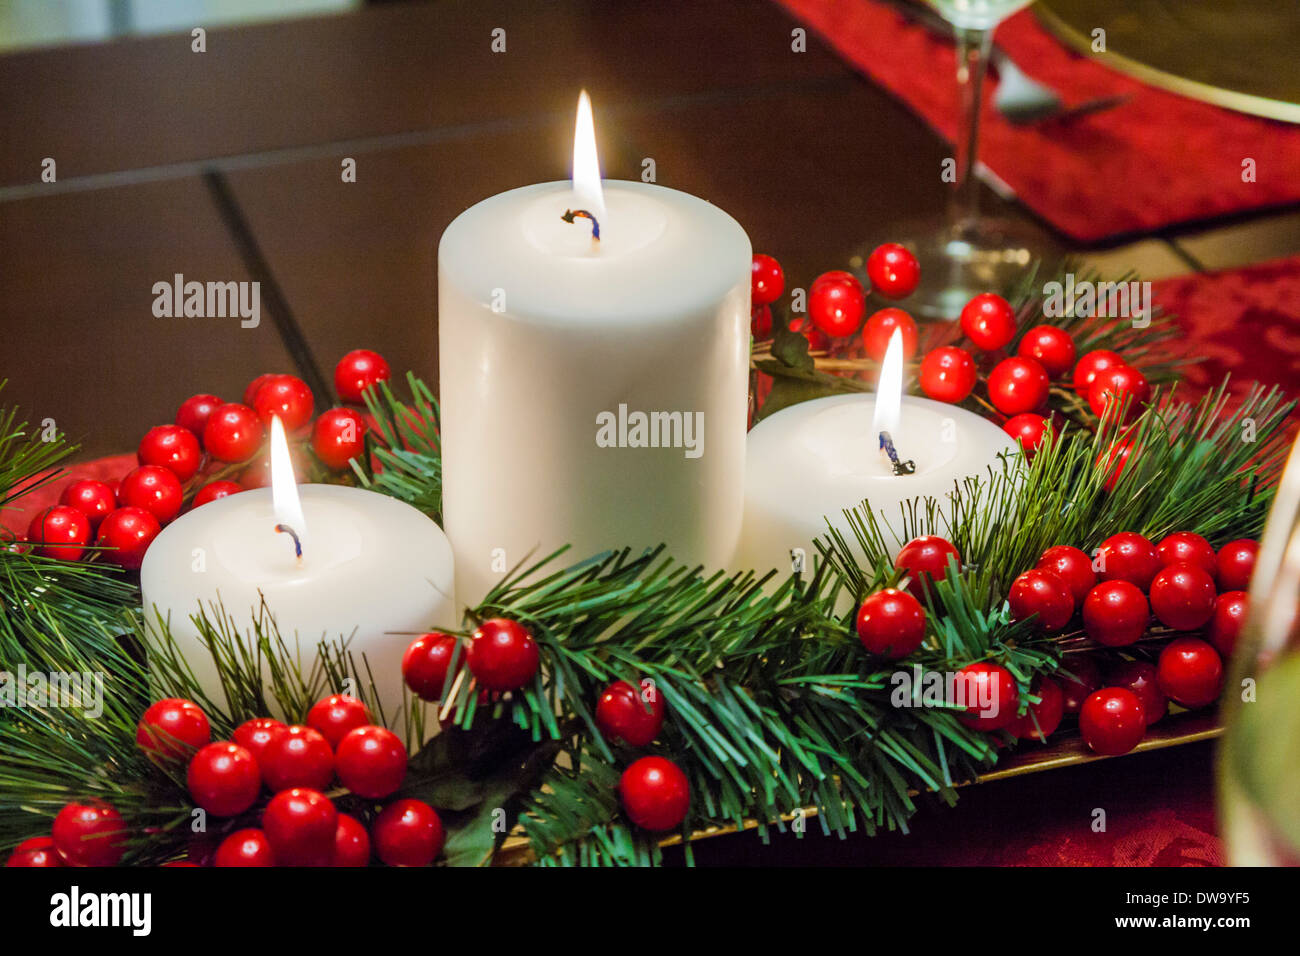 Three tiered candles with garland and holly berries decorate Christmas holiday table Stock Photo